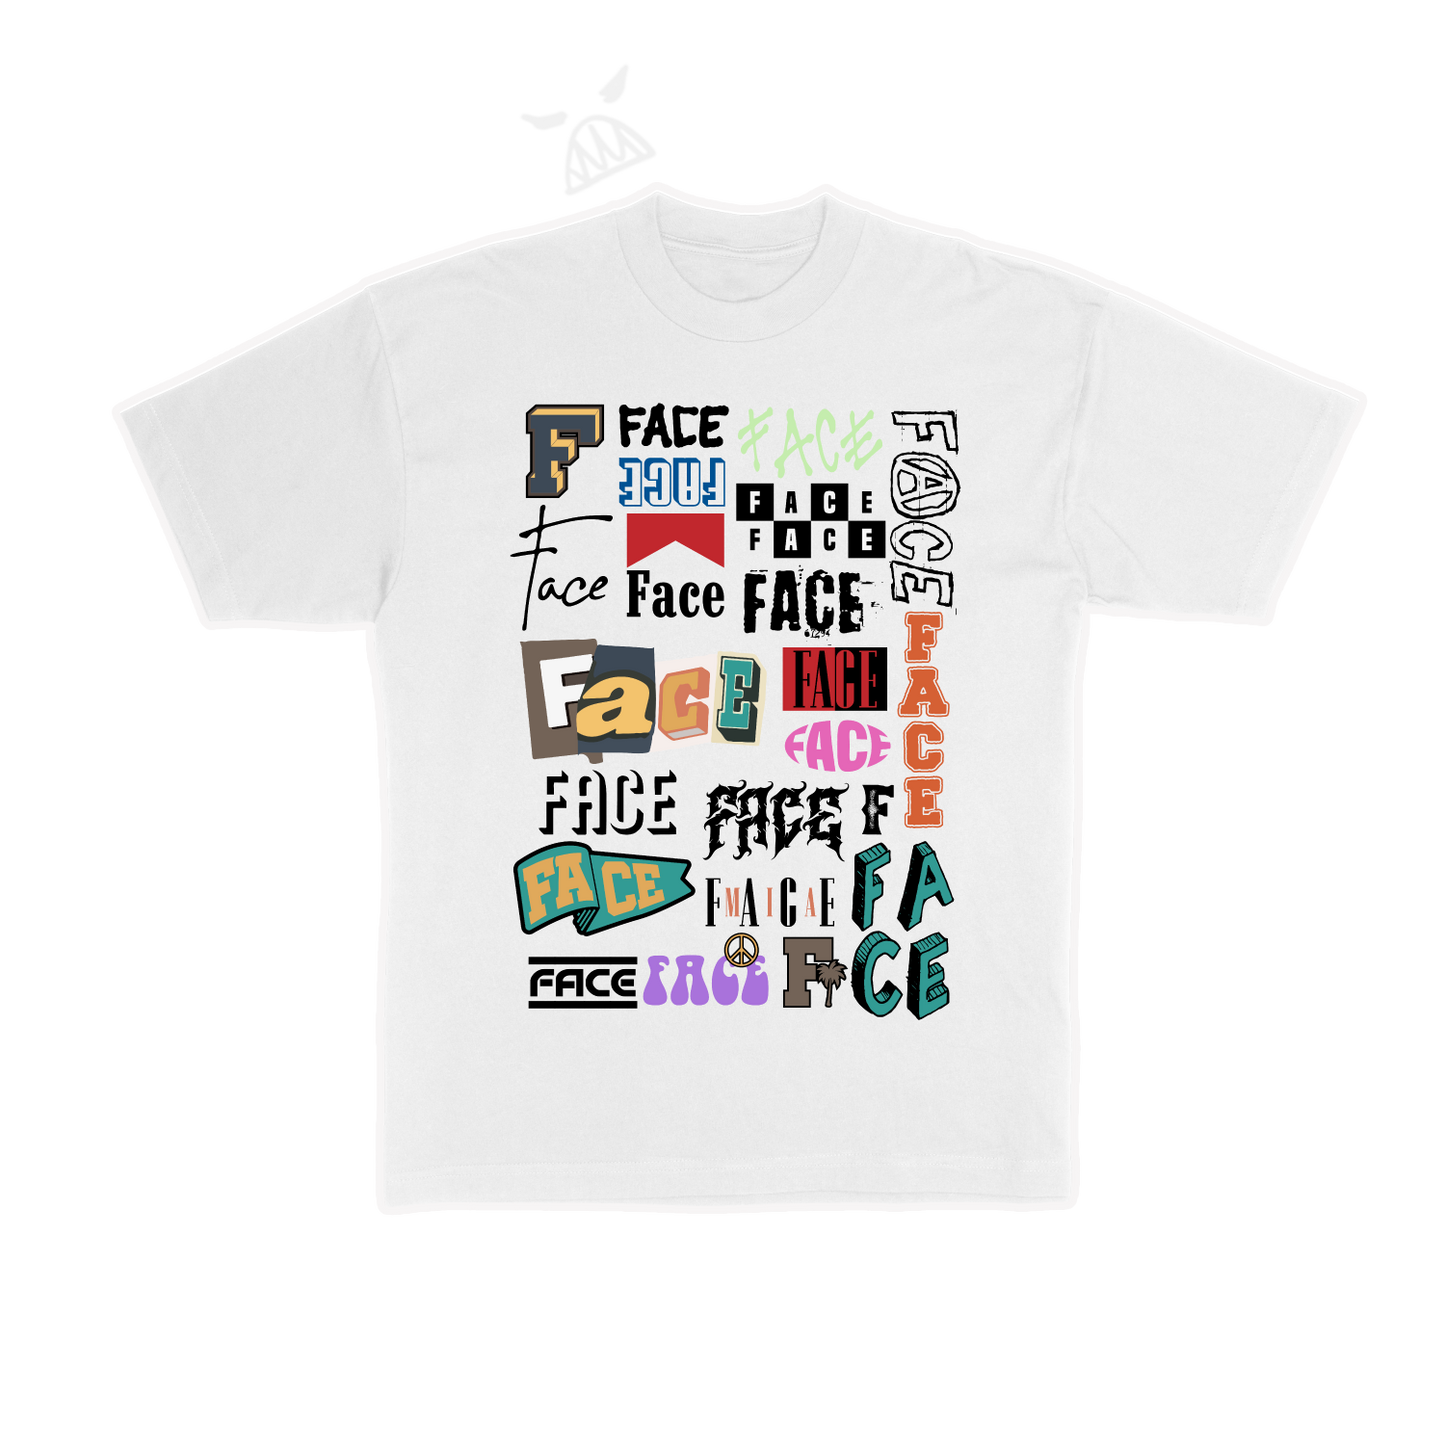 FACE Collage T-Shirt (White)